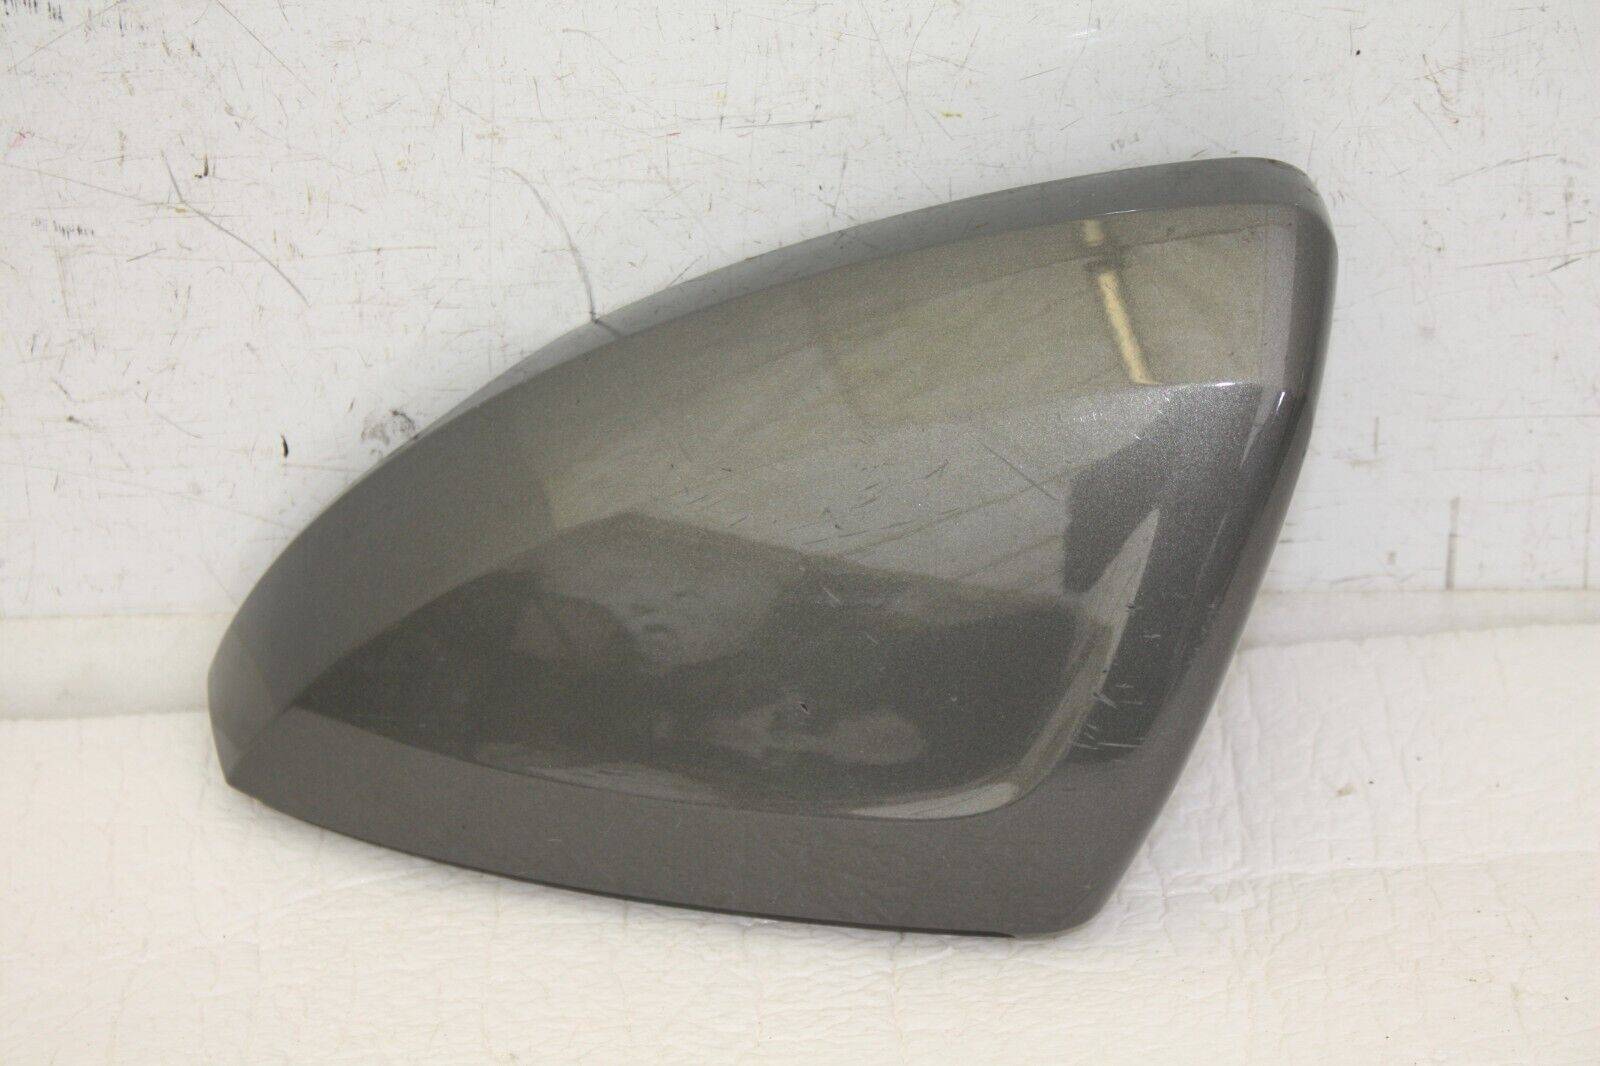 Audi A1 VW Polo Left Side Mirror Cover 2G0857537A Genuine 176401790996